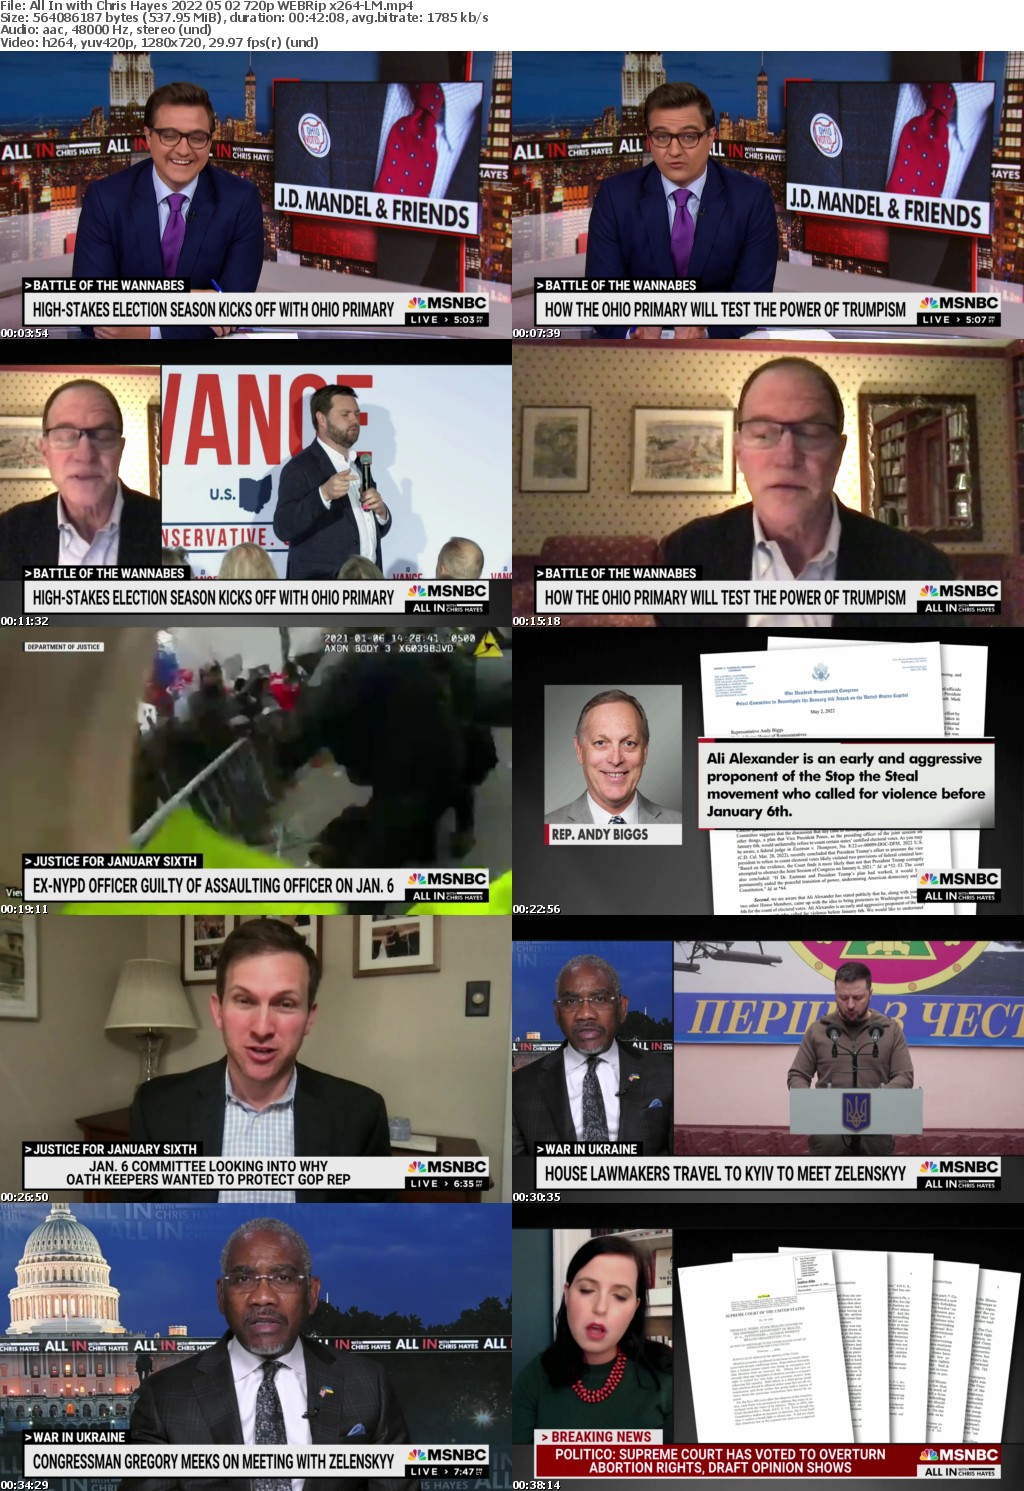 All In with Chris Hayes 2022 05 02 720p WEBRip x264-LM